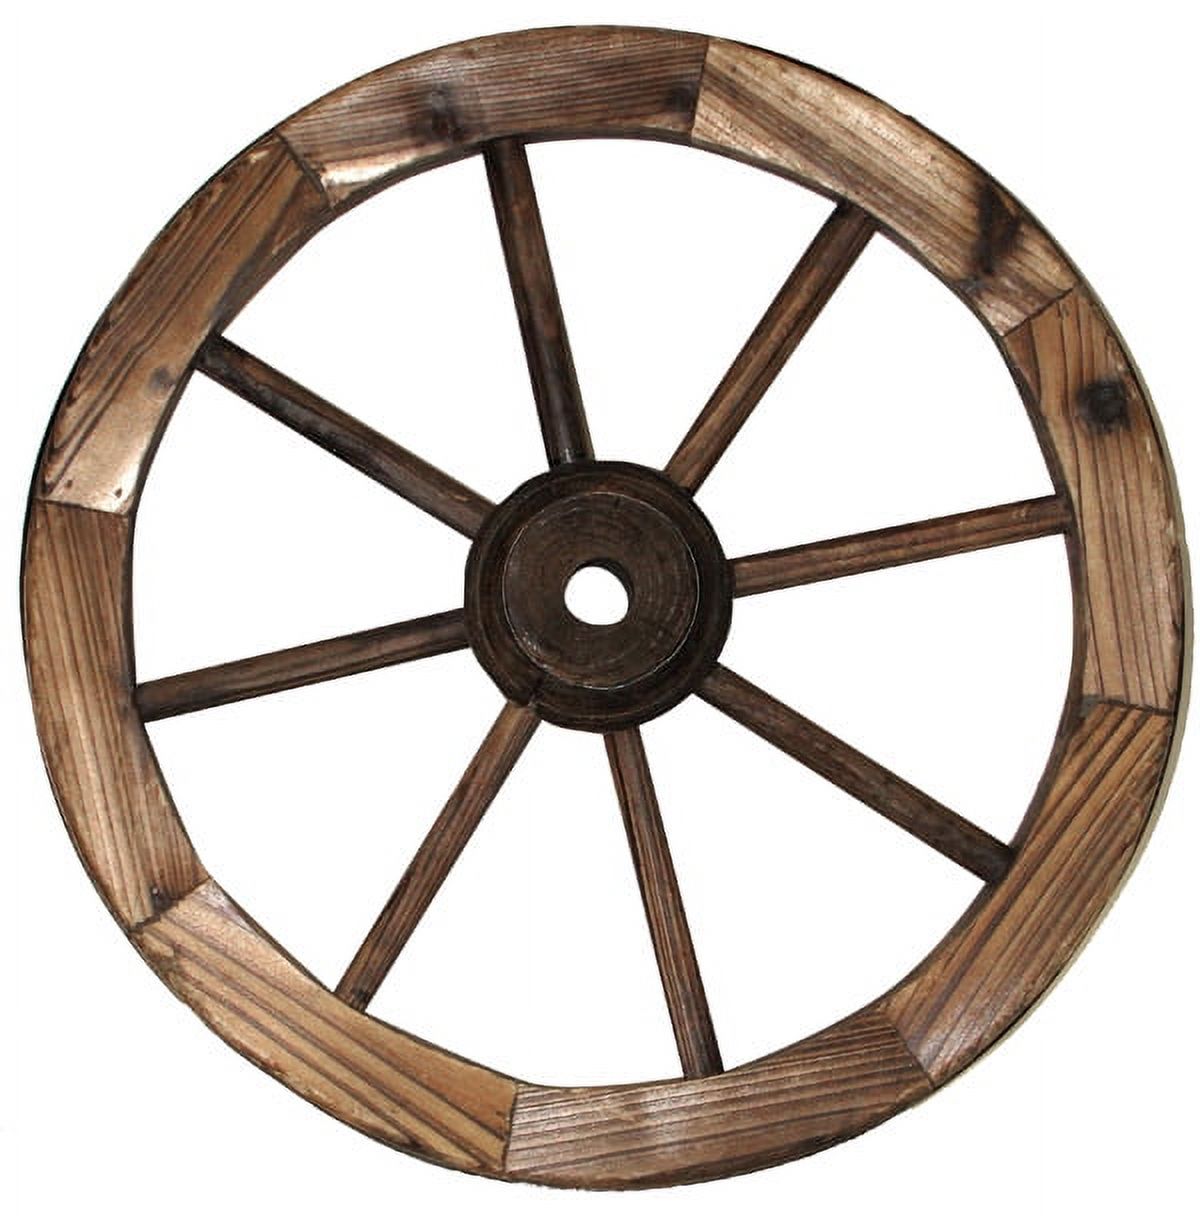 Leigh Country Eighteen Inch Decorative Wagon Wheel - image 1 of 7